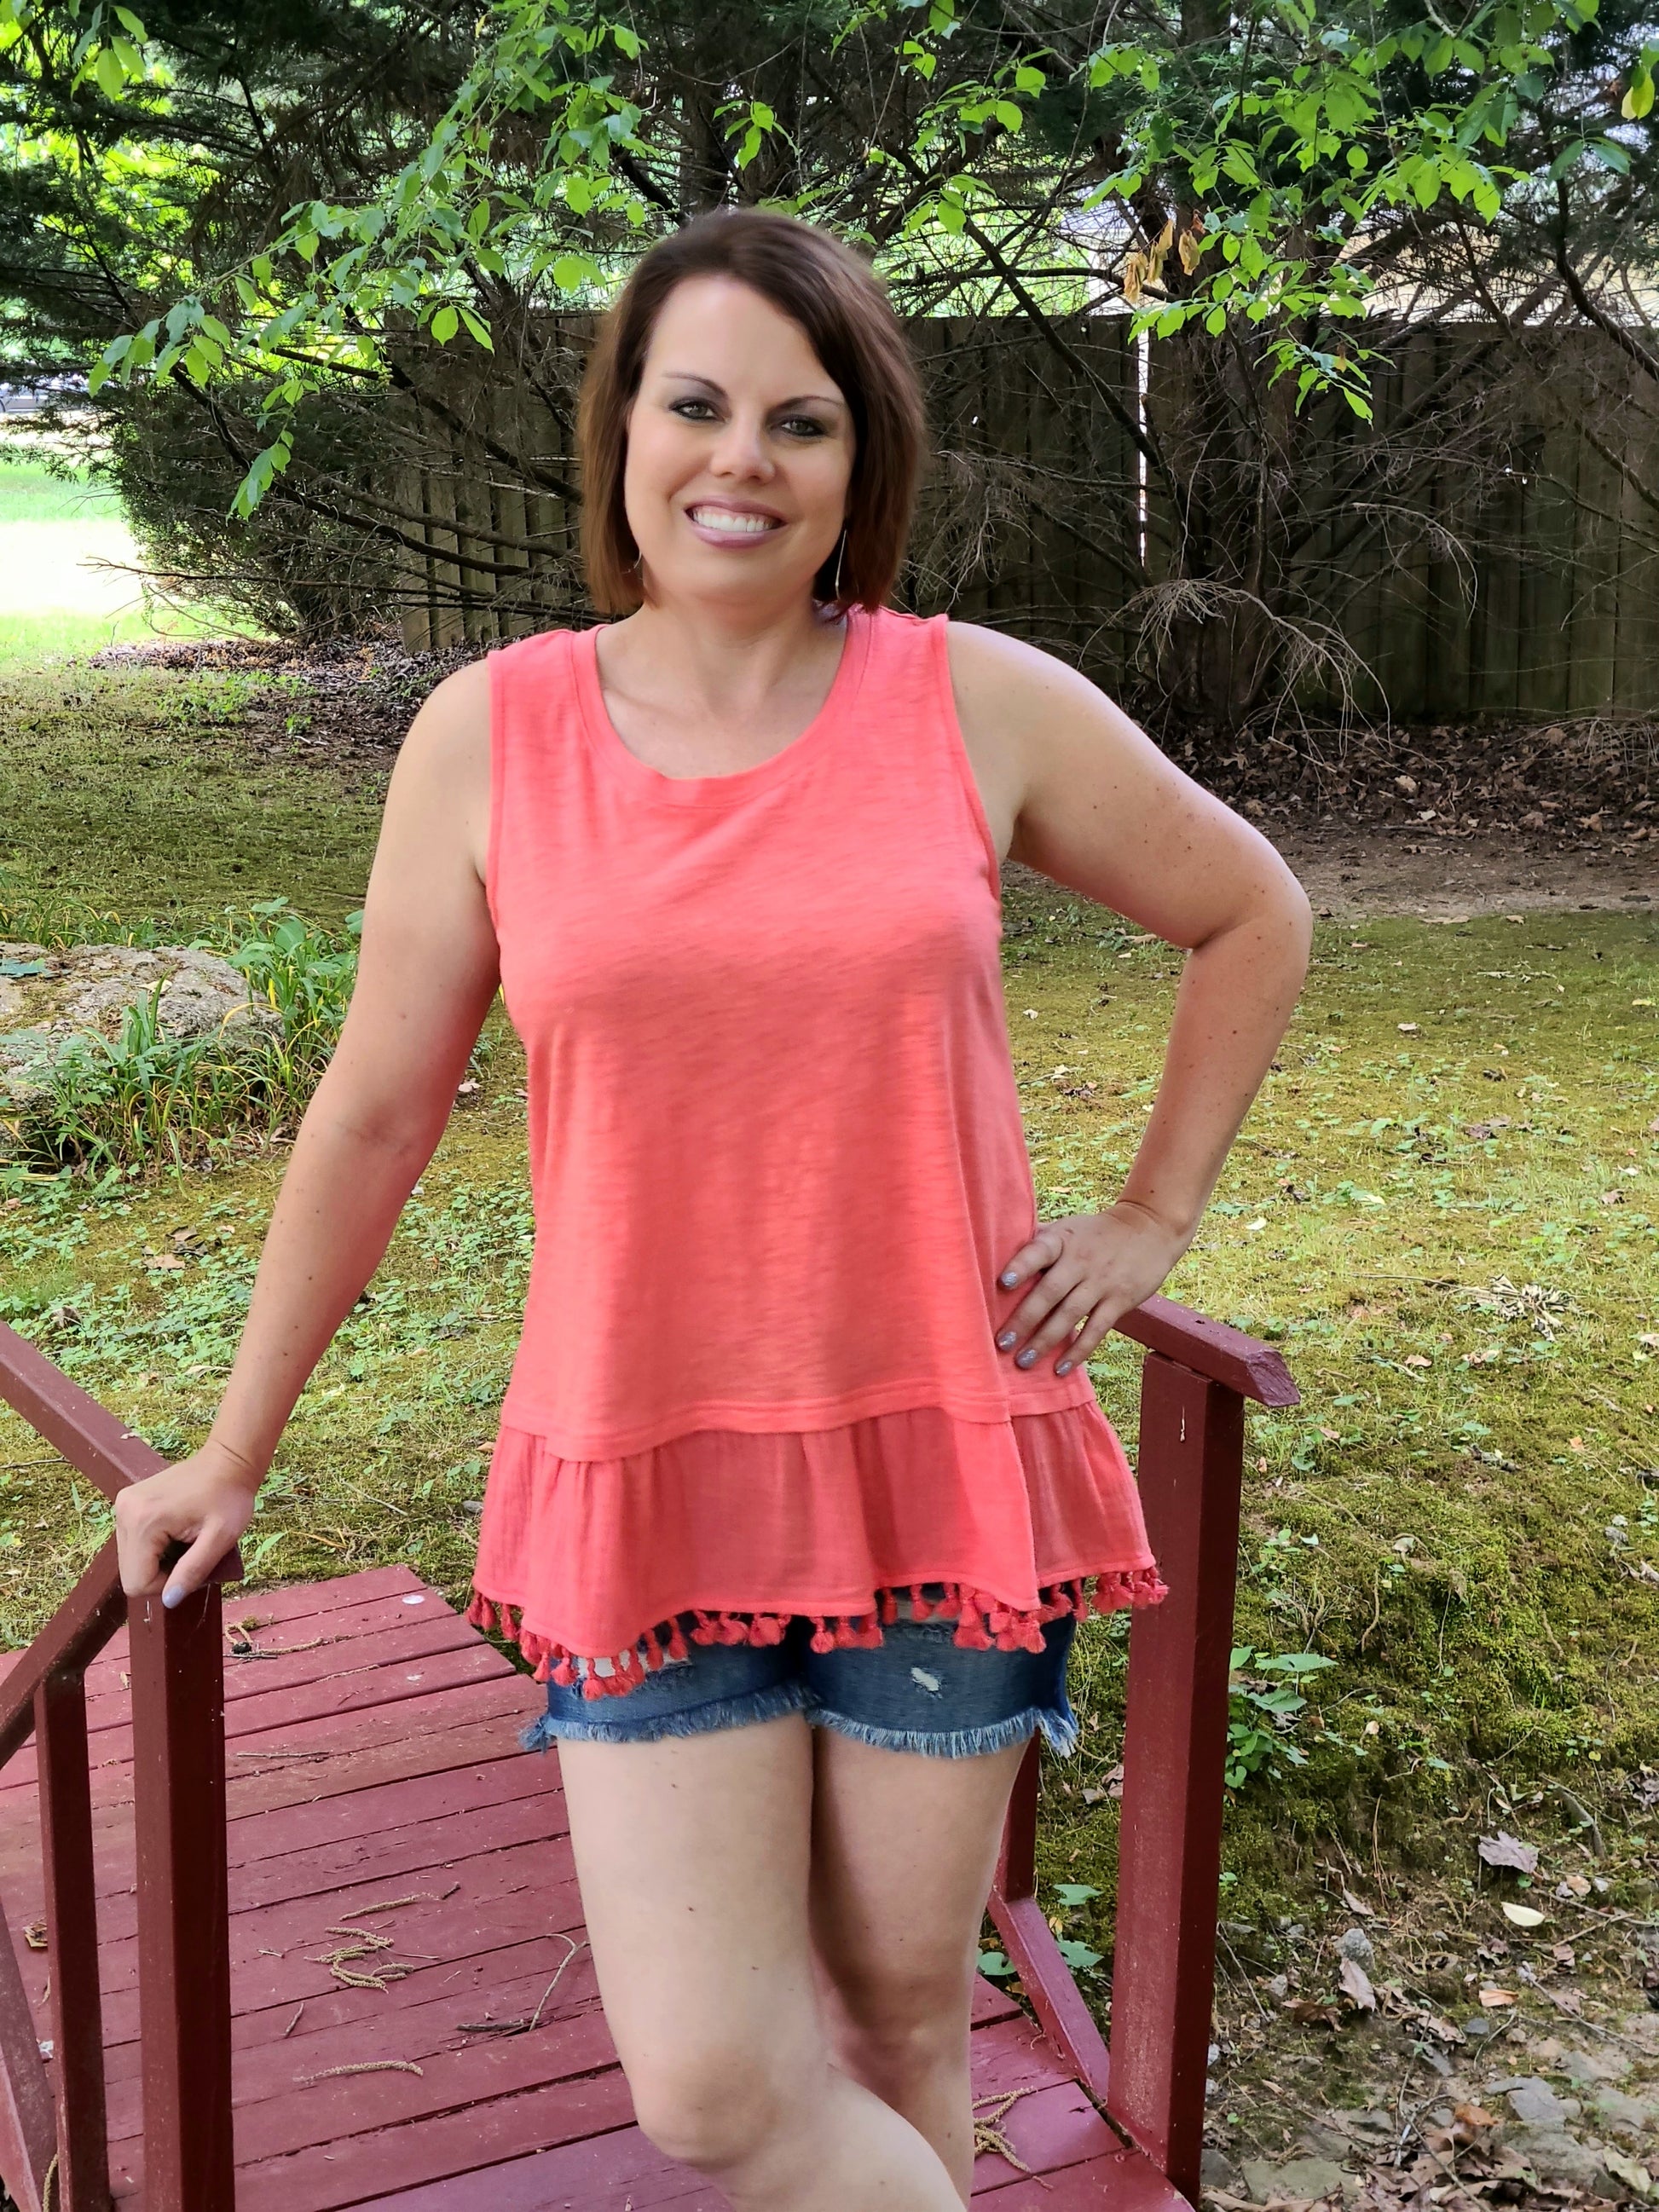 In a softened slub fabric, this timeless tank gets a free-spirited edge by way of the fringe hem detail that it has. It also includes a round neckline and is so soft and comfortable.